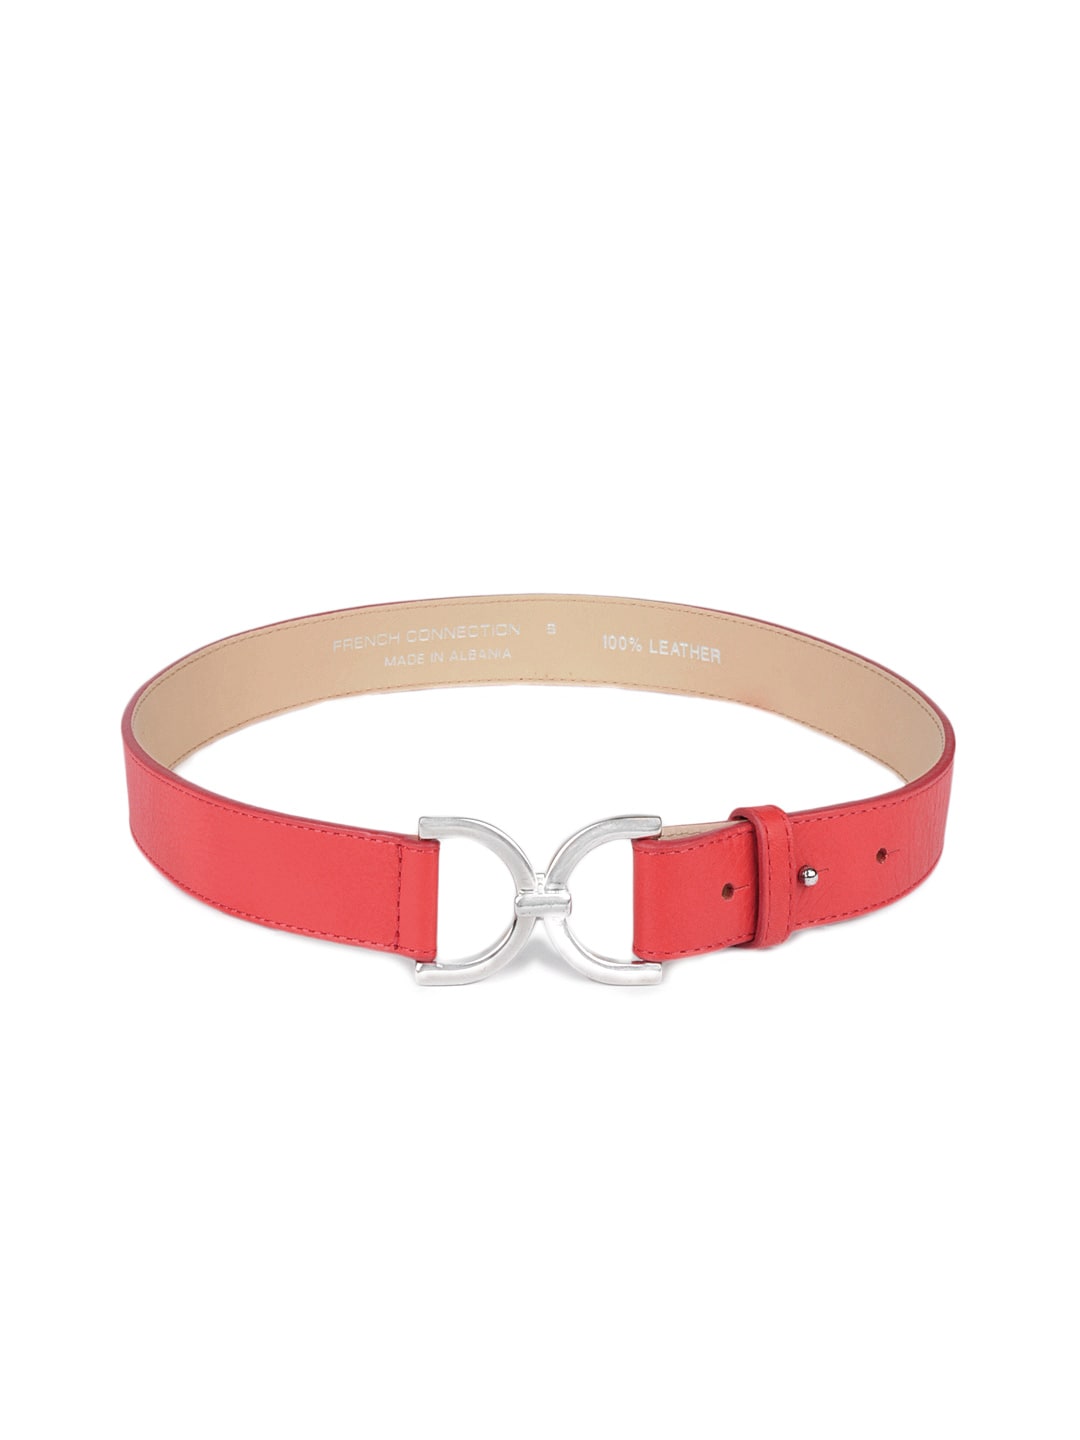 French Connection Women Red Belt